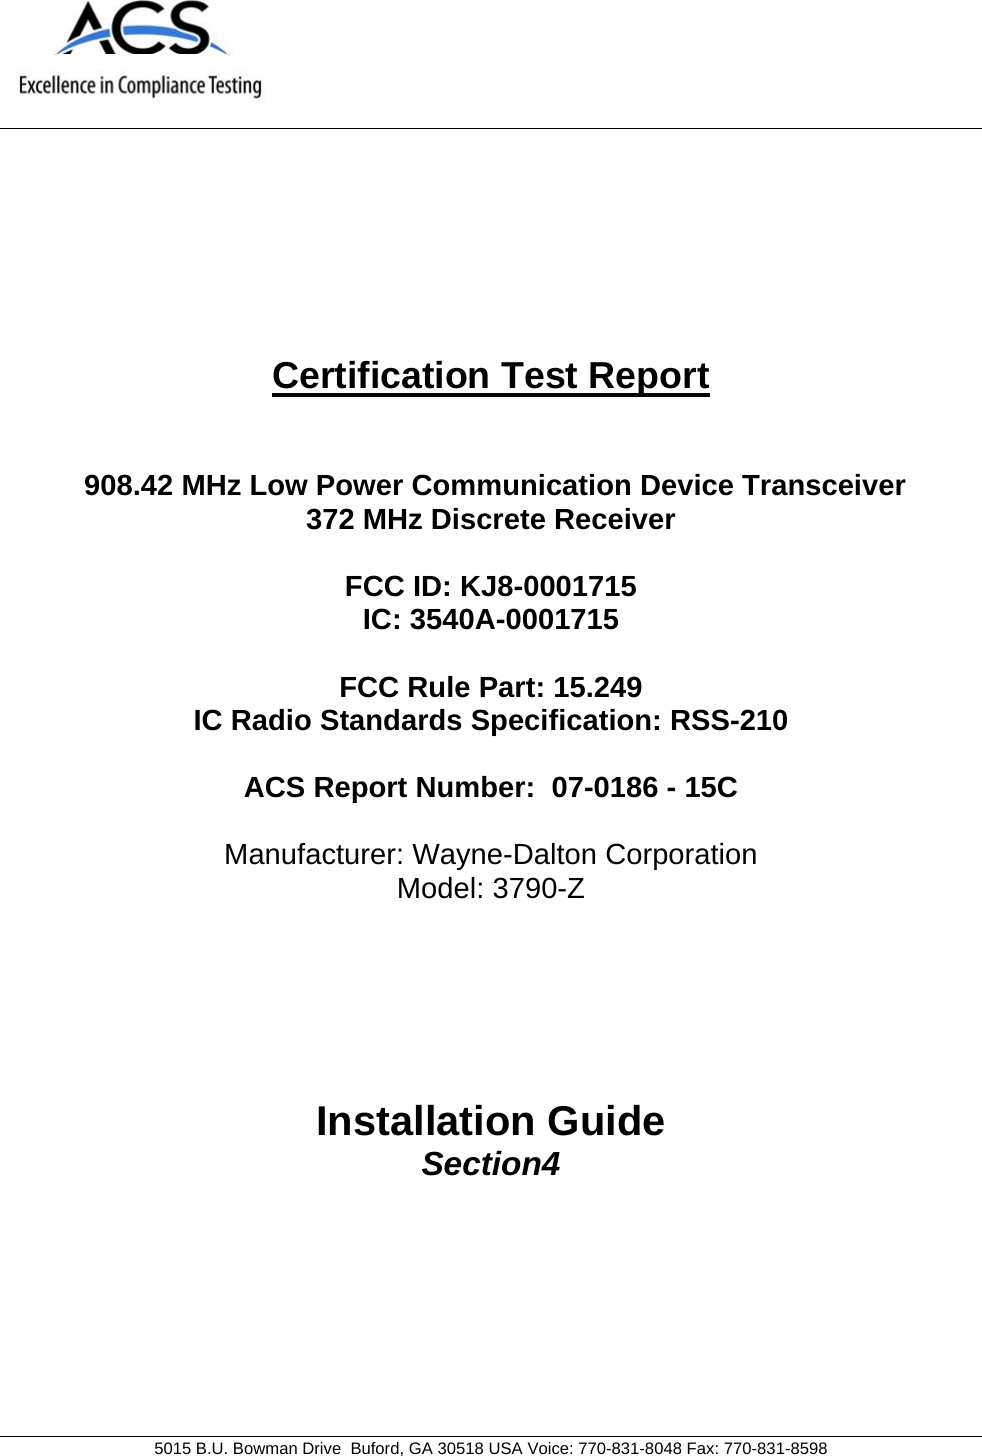     5015 B.U. Bowman Drive  Buford, GA 30518 USA Voice: 770-831-8048 Fax: 770-831-8598   Certification Test Report    908.42 MHz Low Power Communication Device Transceiver 372 MHz Discrete Receiver  FCC ID: KJ8-0001715  IC: 3540A-0001715  FCC Rule Part: 15.249 IC Radio Standards Specification: RSS-210  ACS Report Number:  07-0186 - 15C   Manufacturer: Wayne-Dalton Corporation Model: 3790-Z     Installation Guide Section4  